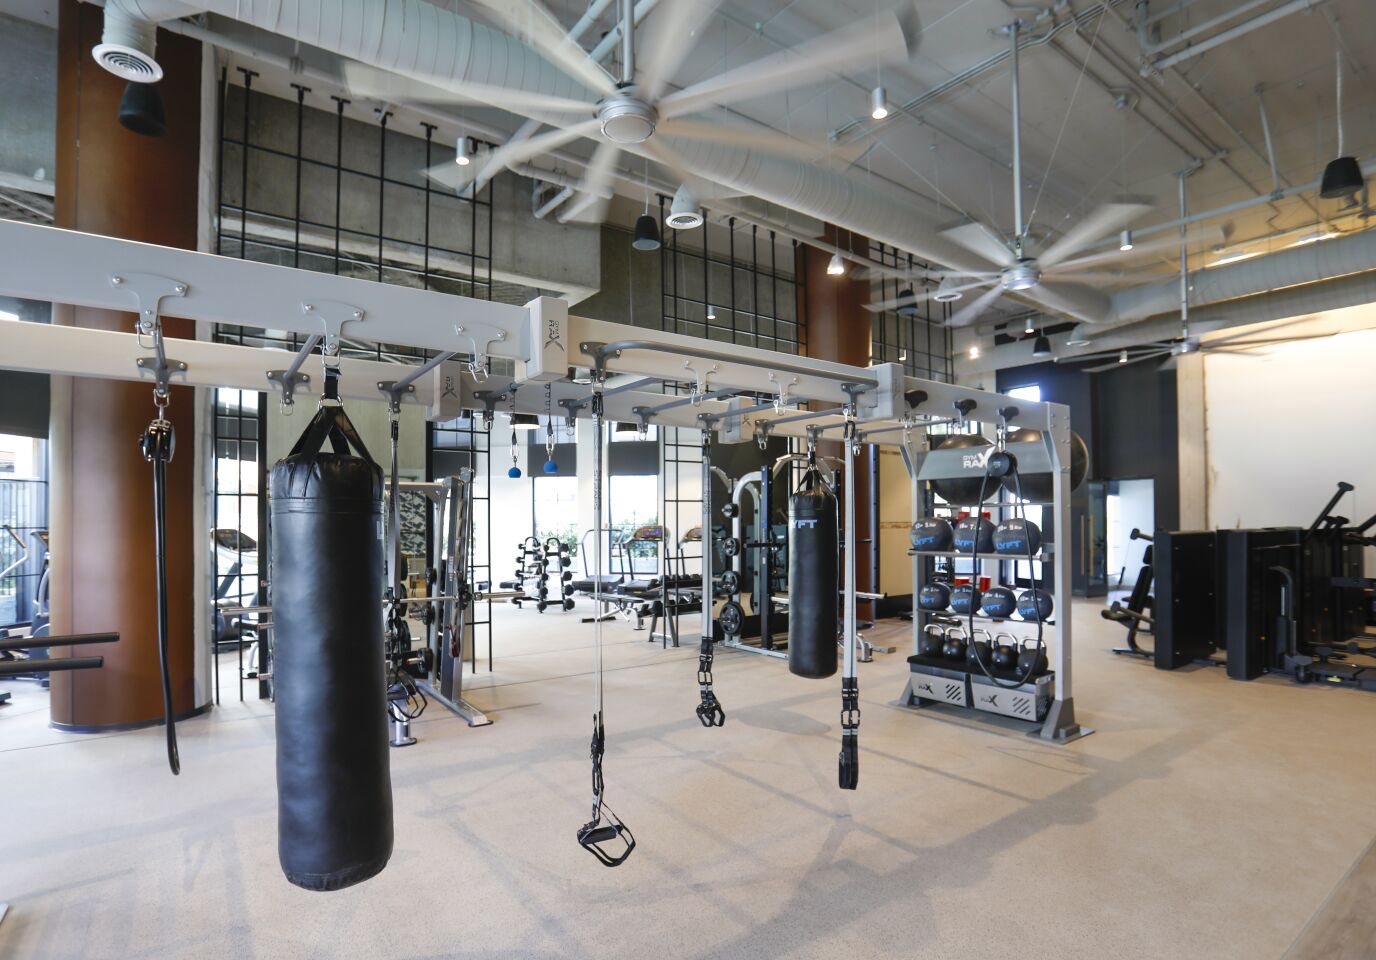 The fitness center at One Paseo, the upscale apartment homes project in Carmel Valley, part of the 23-acre mixed-use project. Photographed October 8, 2019, in San Diego, California.